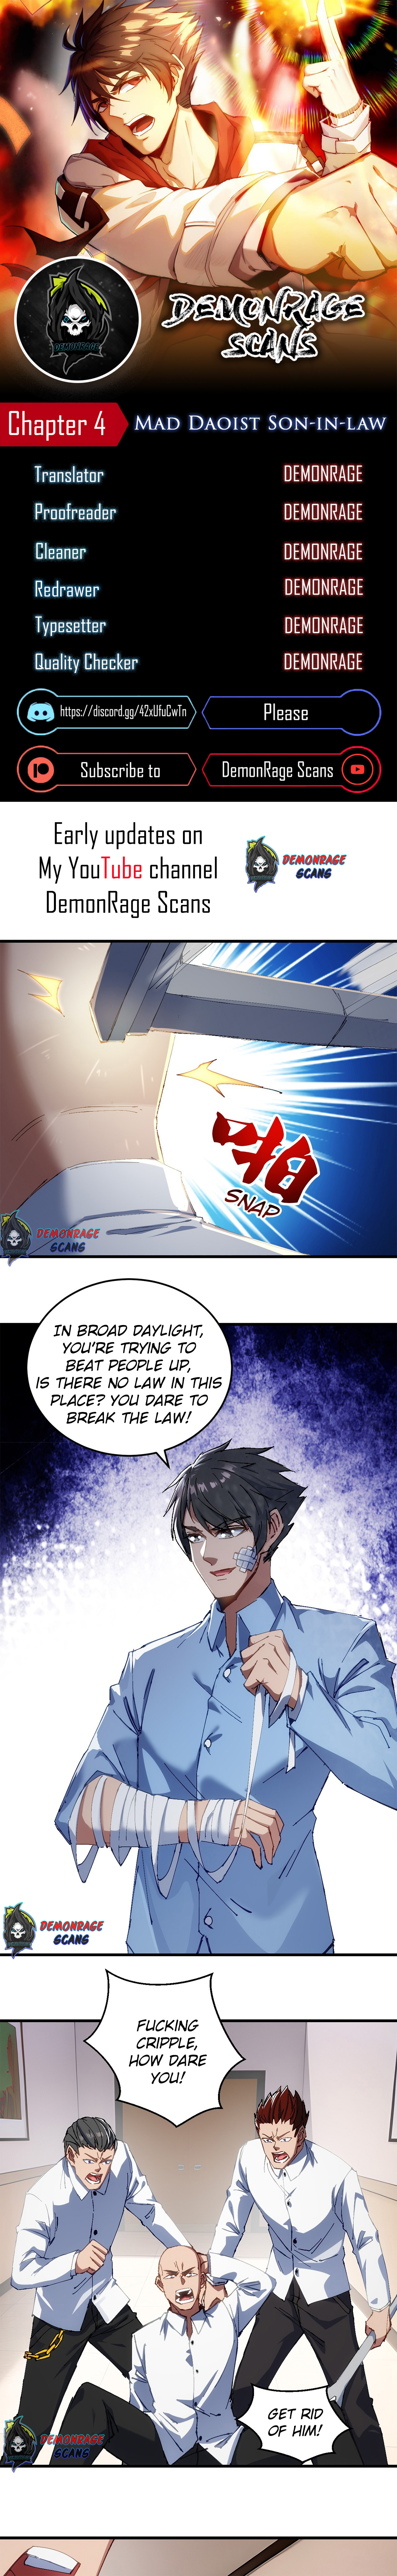 Mad Daoist Son-In-Law Chapter 4 #1